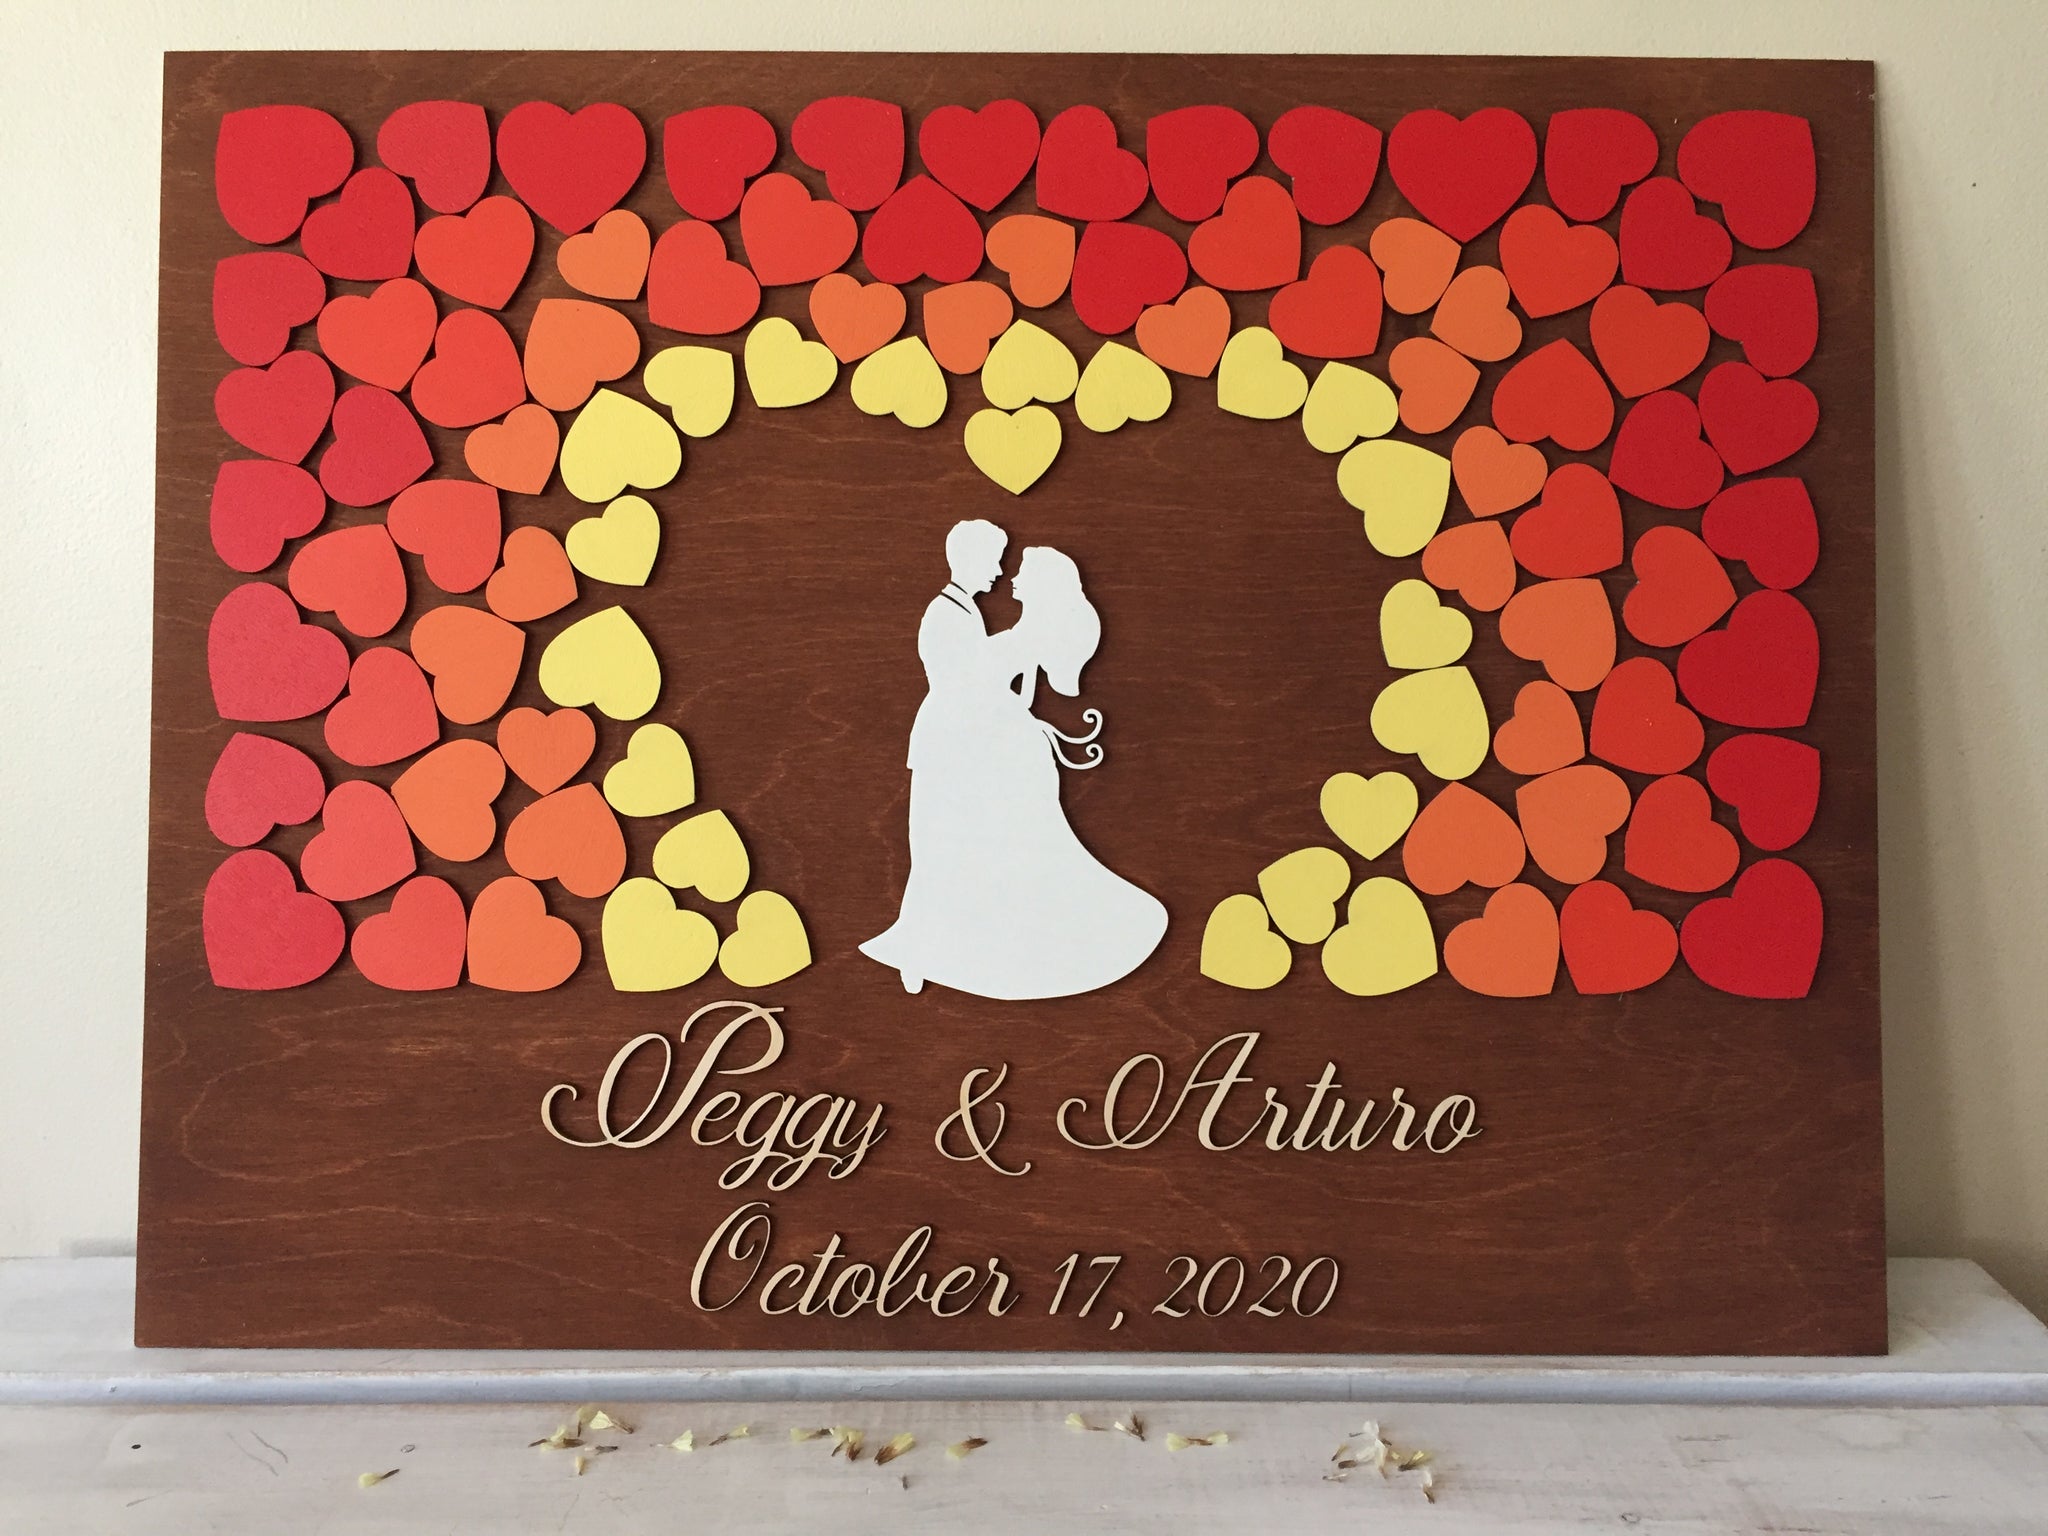 Guest book alternative with embracing couple in the centre and surrounded by hearts that also form a heart shape around the couple. The hearts are painted in fall colors from bright red to orange to yellow and there is a 3D cutout of the names of the couple in calligraphic font. The date is just below the names.